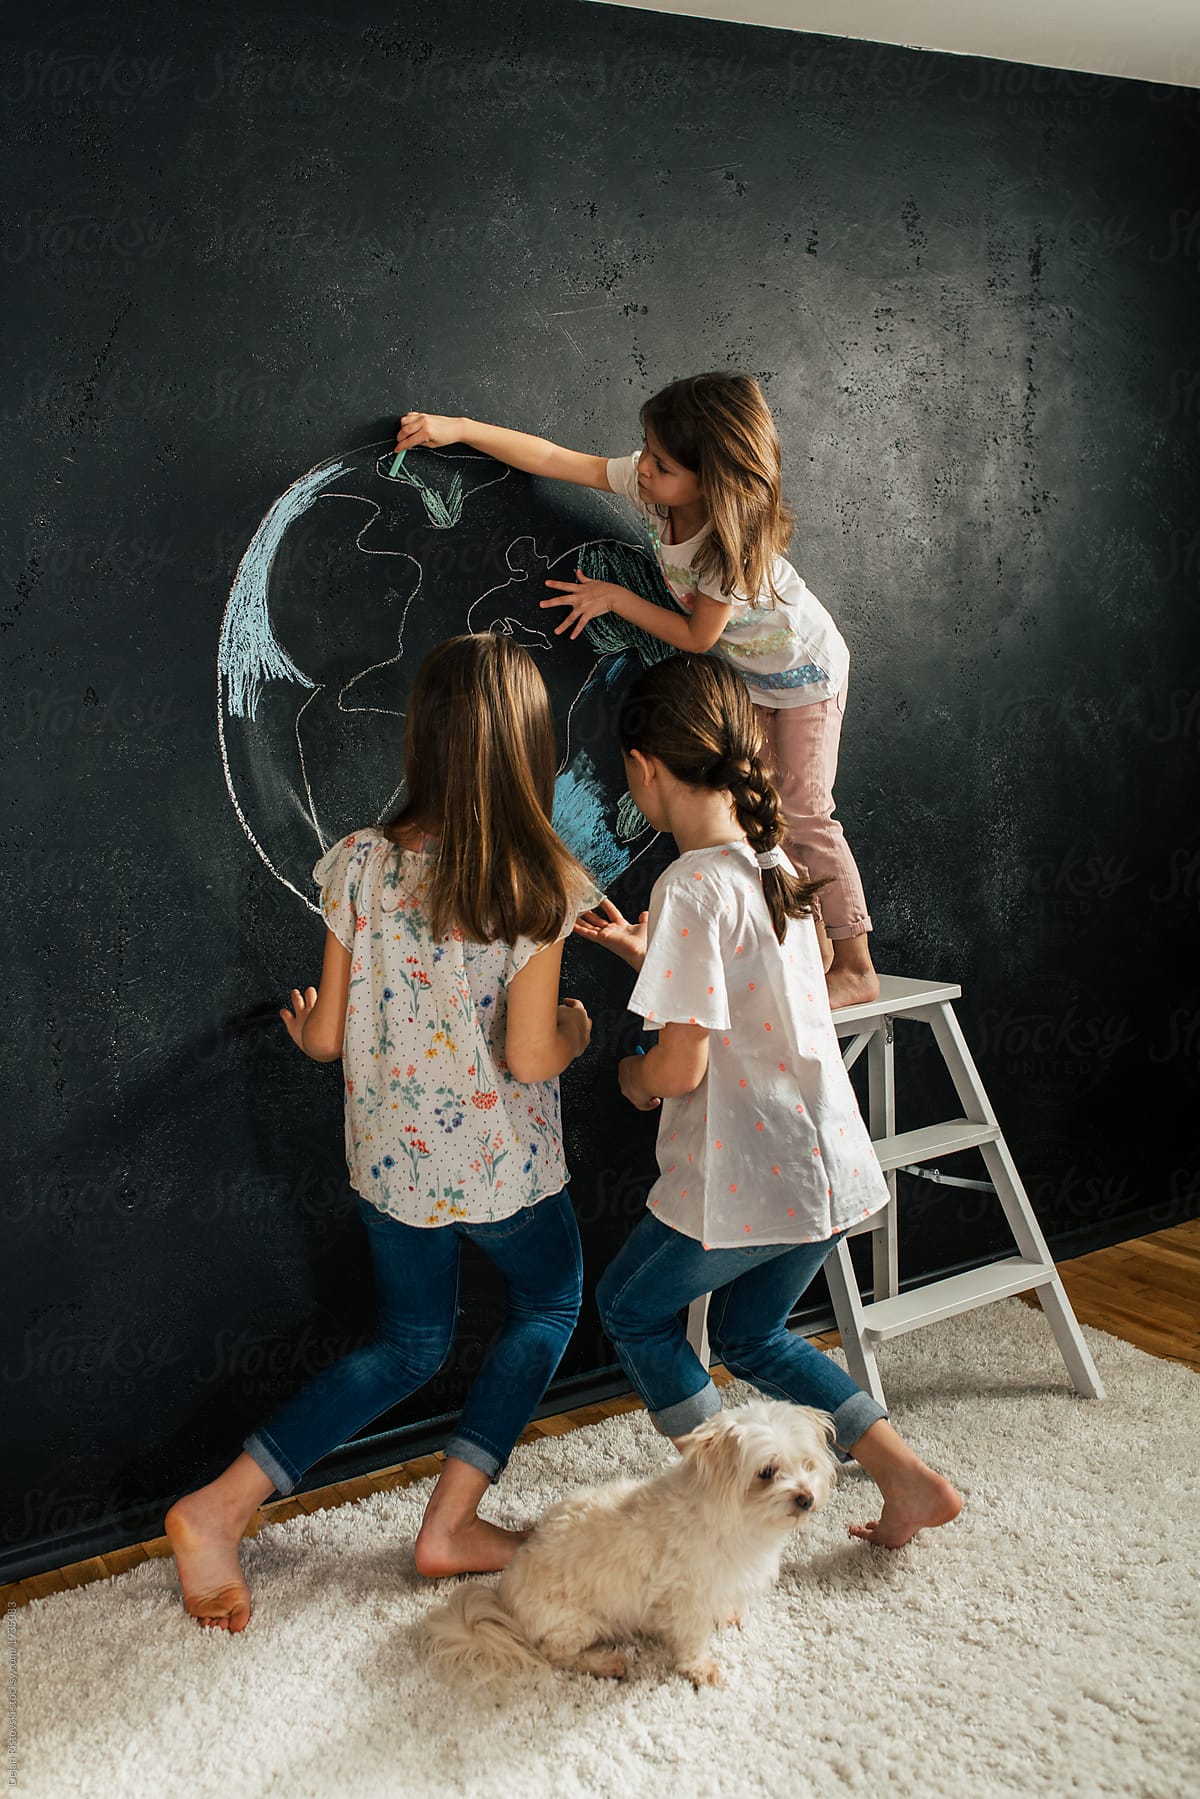 Young girl drawing planet earth on a blackboard